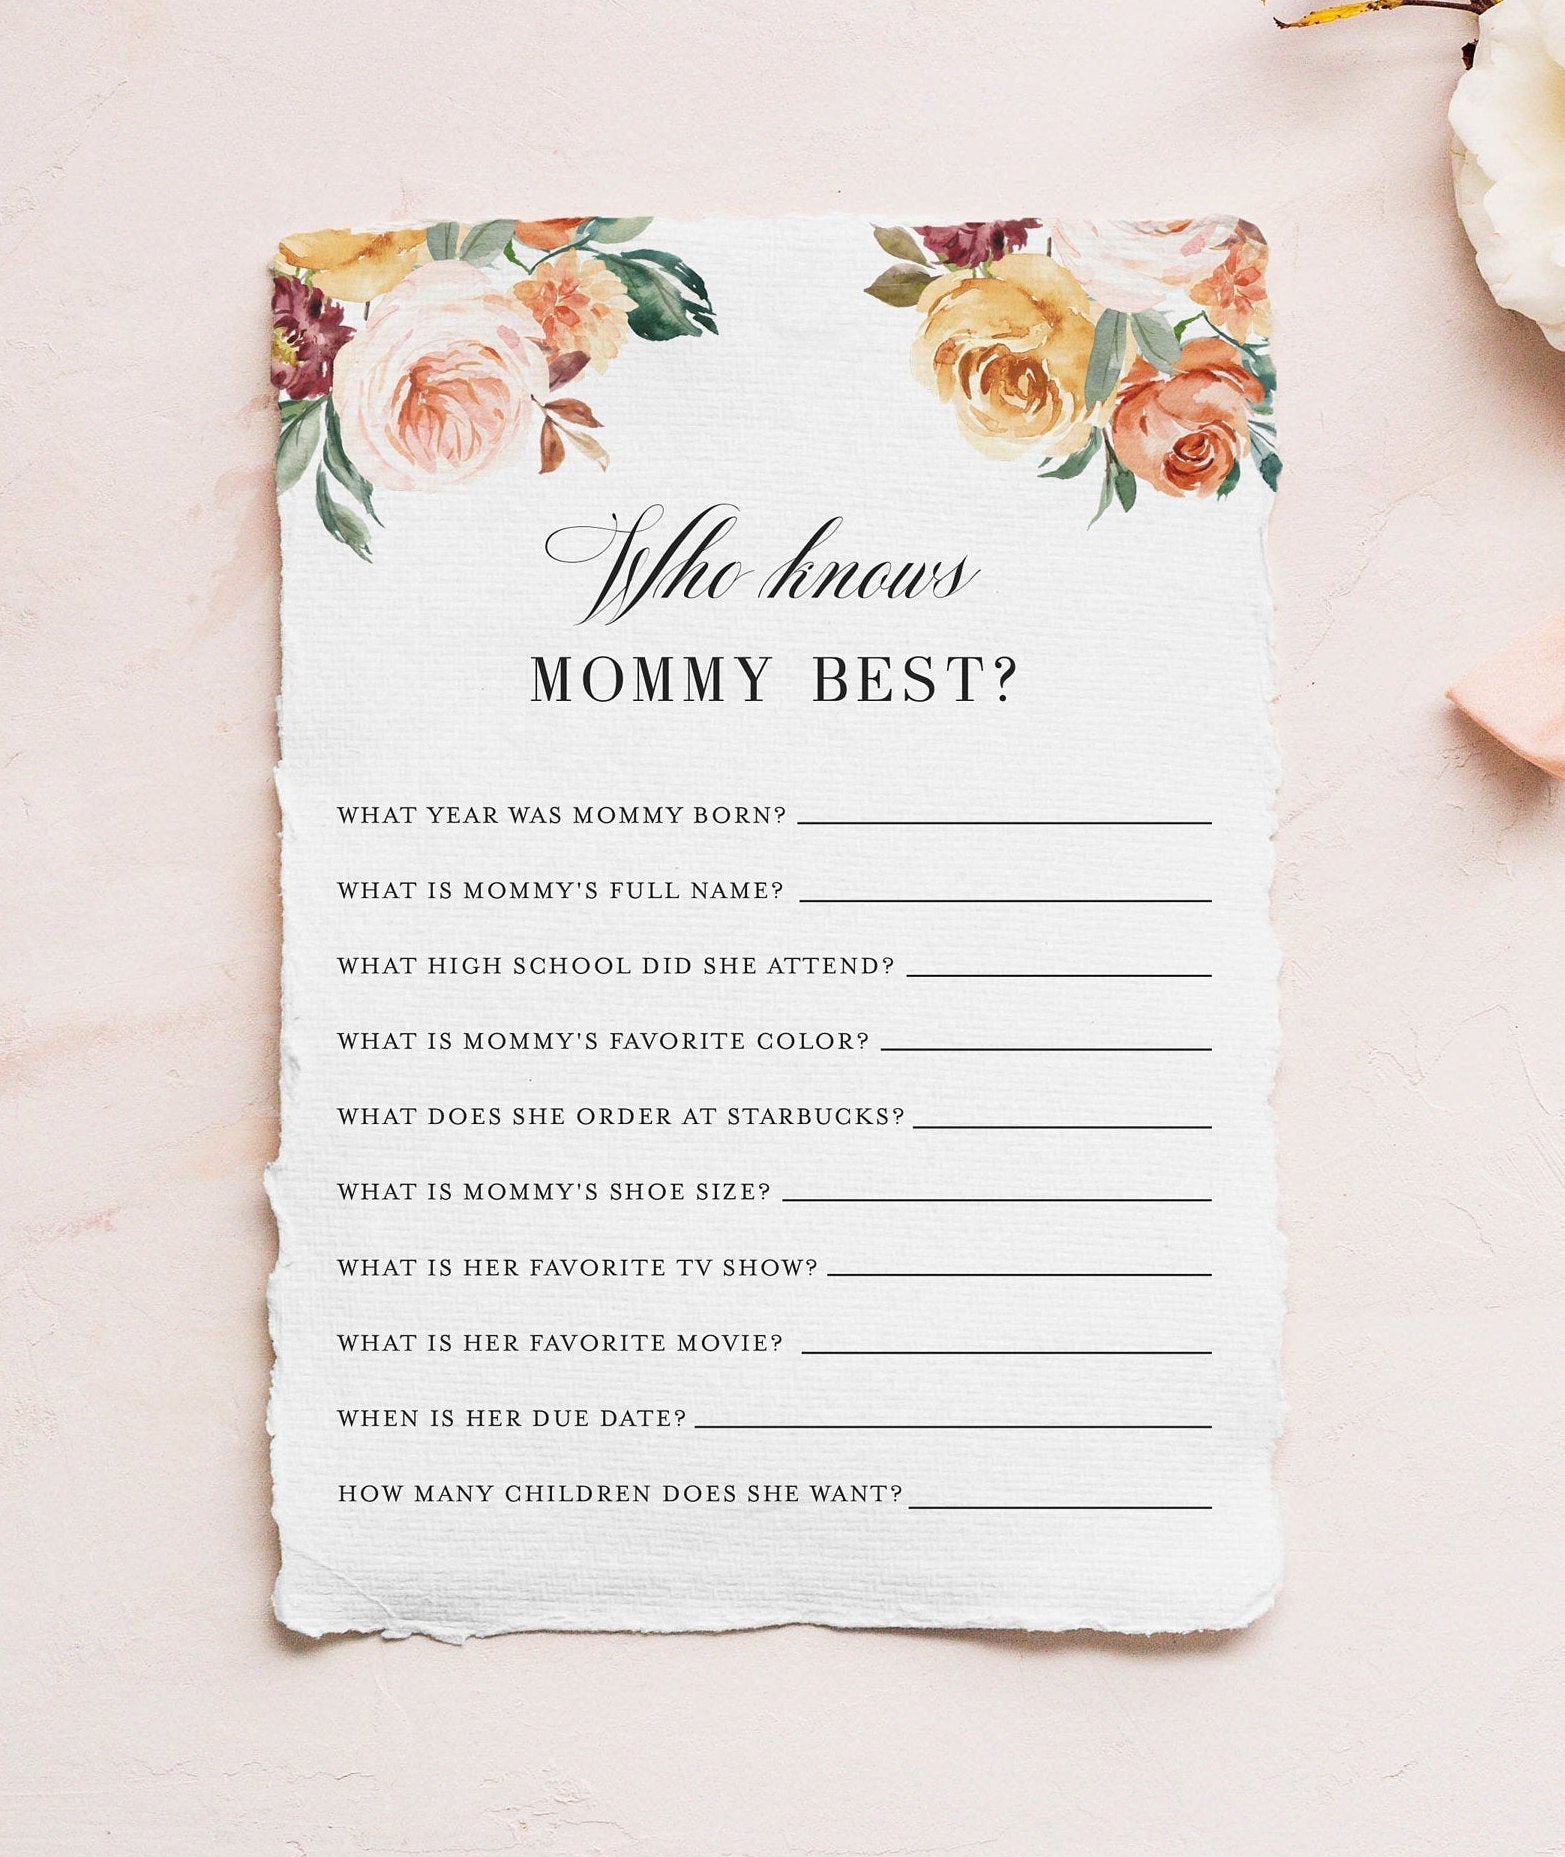 Fall Baby Shower Who knows mom Best, Who knows mommy best, Baby Shower Printable #KR1 GAMES INSERTS SIGNS SAVVY PAPER CO